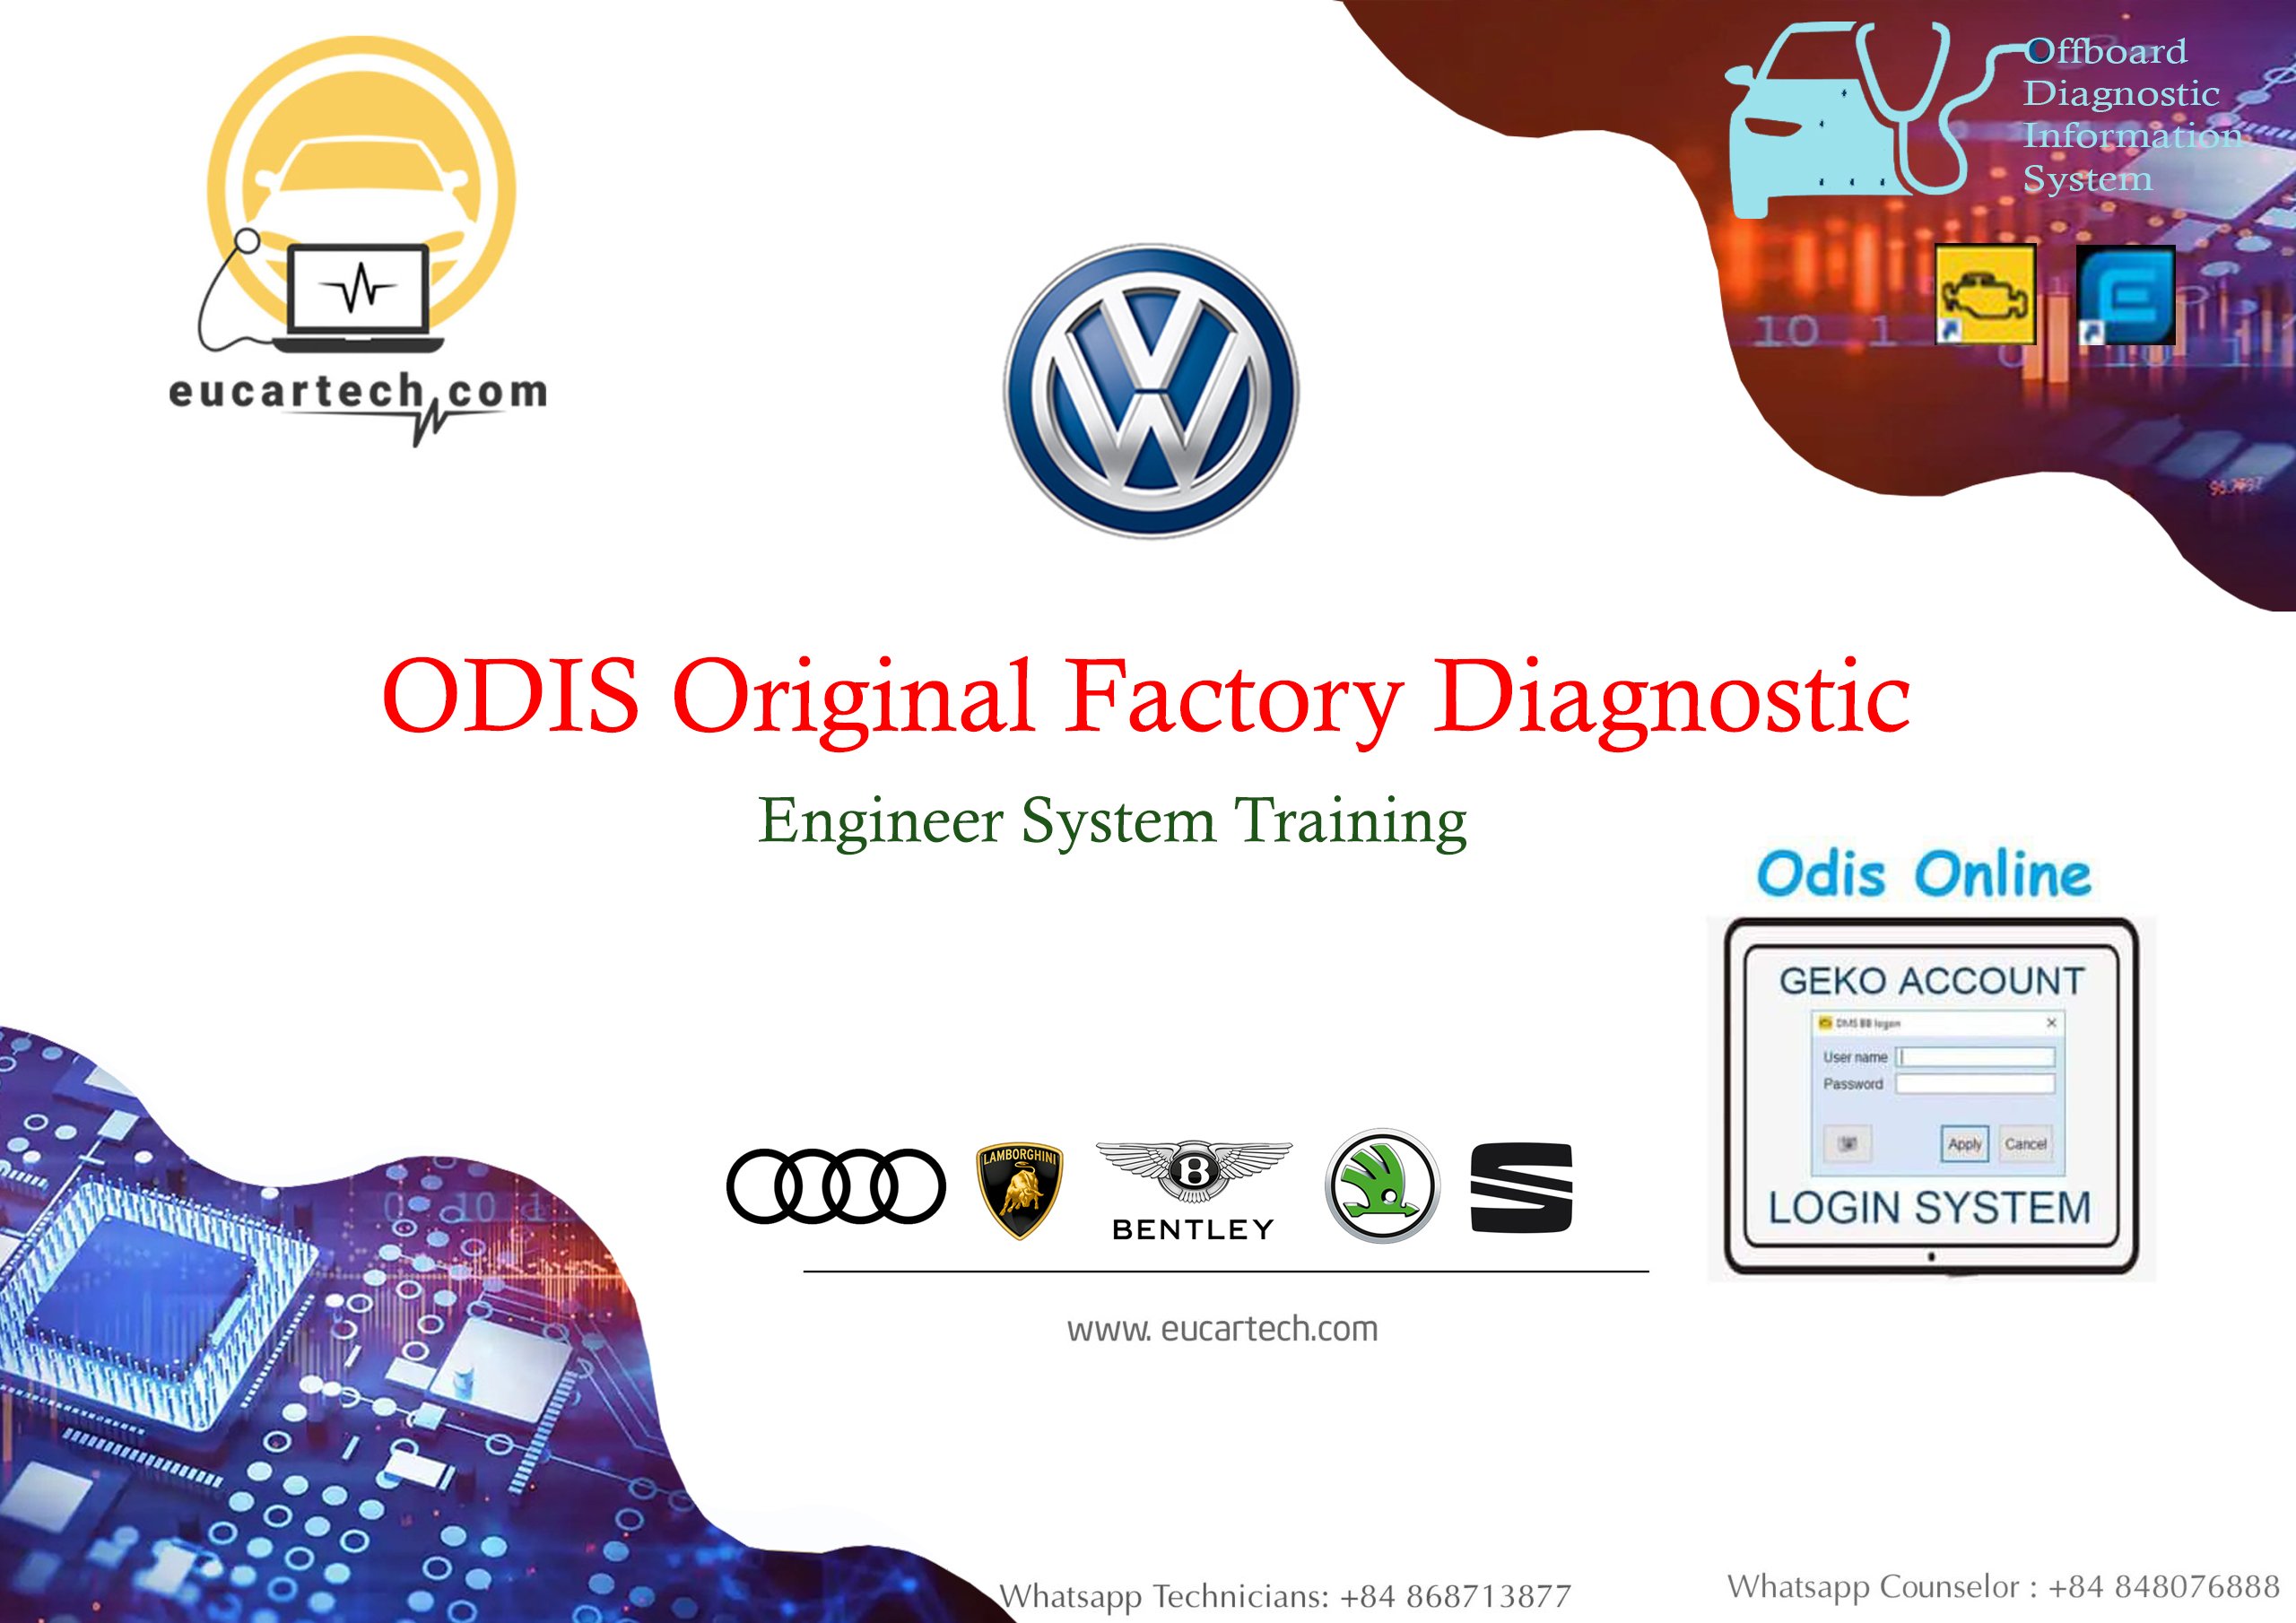 Odis Origianl Factory Diagnostic Firsit book for real special functions ODIS E and ODIS S software